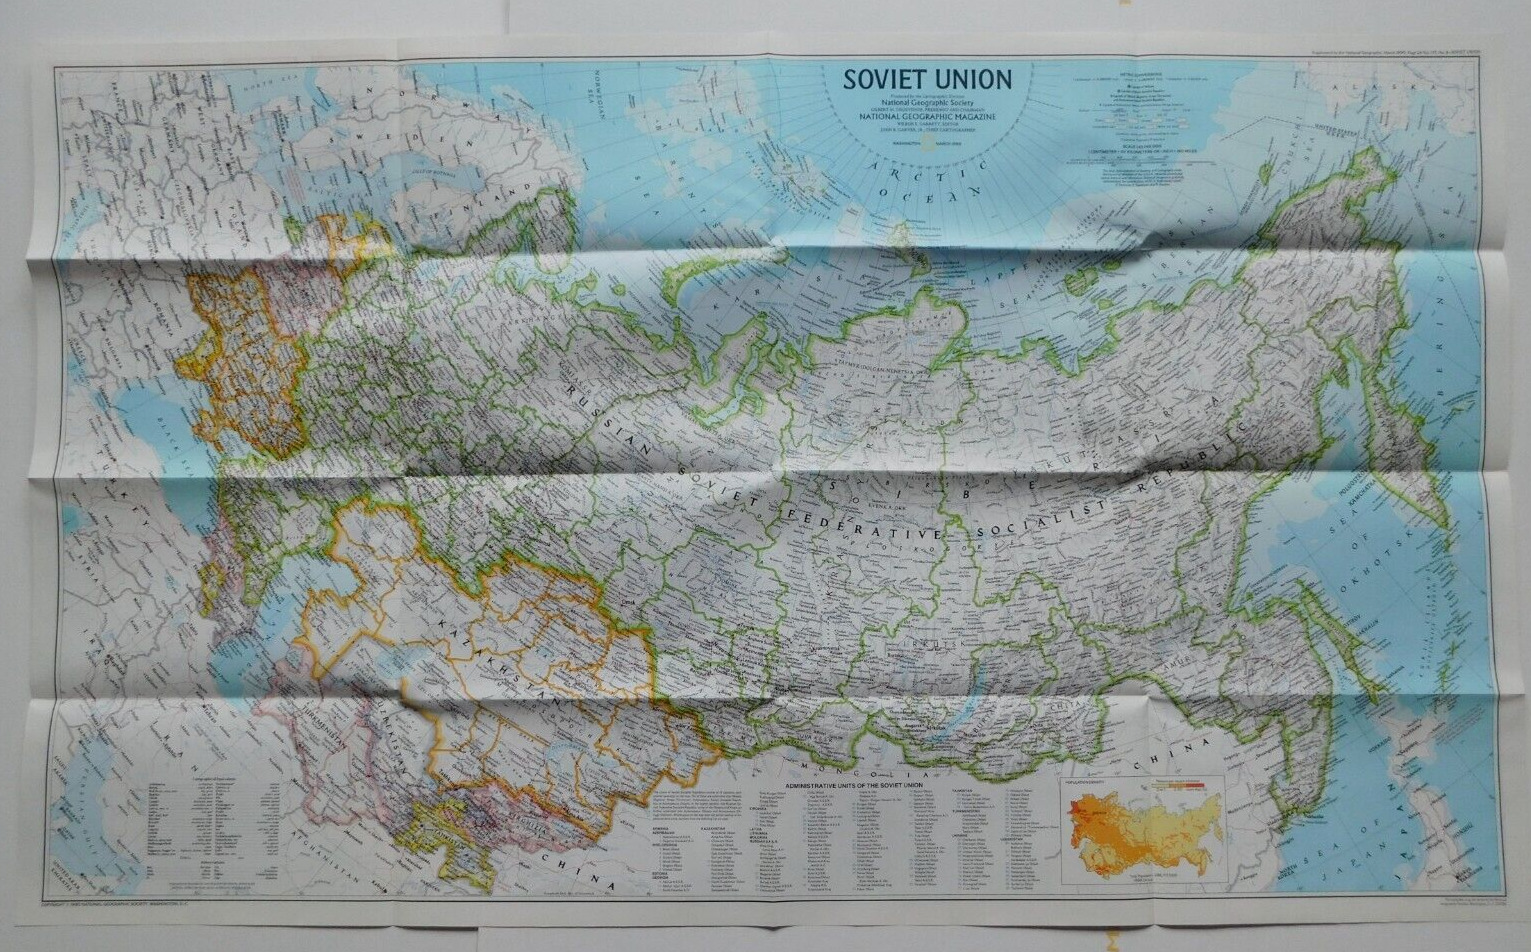 Soviet Union - 1990 National Geographic Map - 22 x 36.5 inch